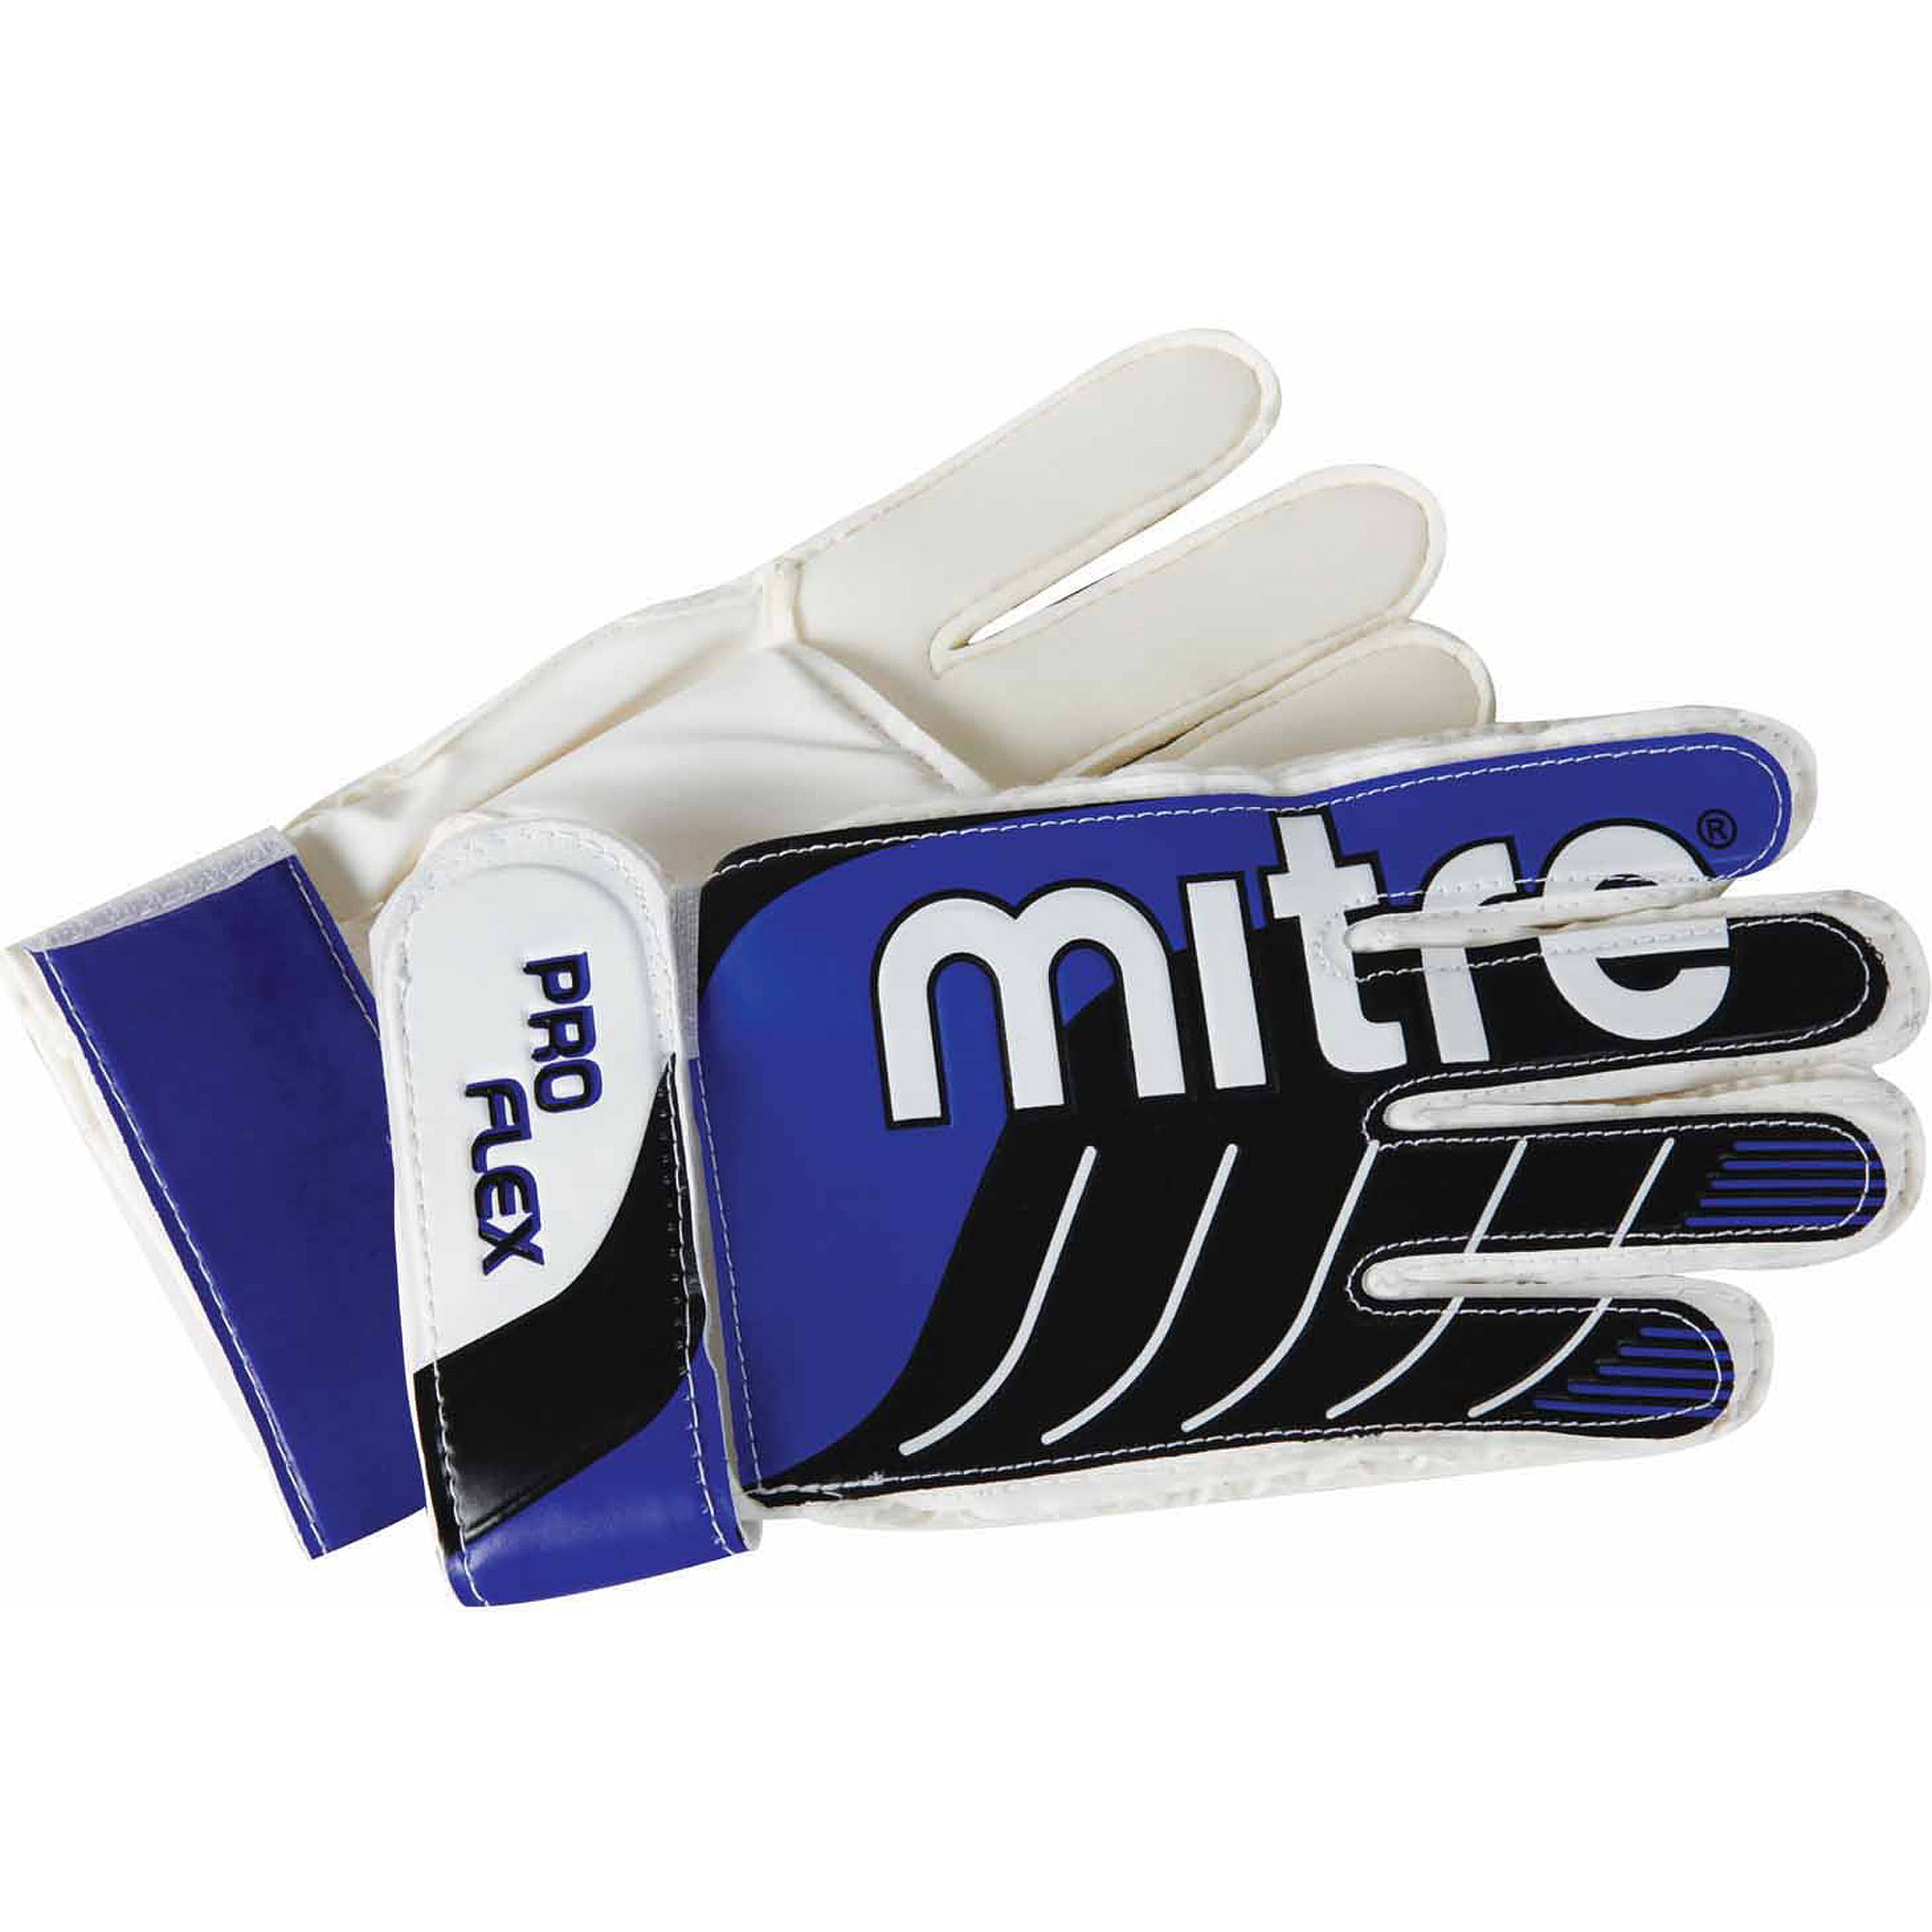 Youth Size 6-1 Pair Junior Goalkeeper Soccer Gloves Details about   Mitre Pro-Flex 